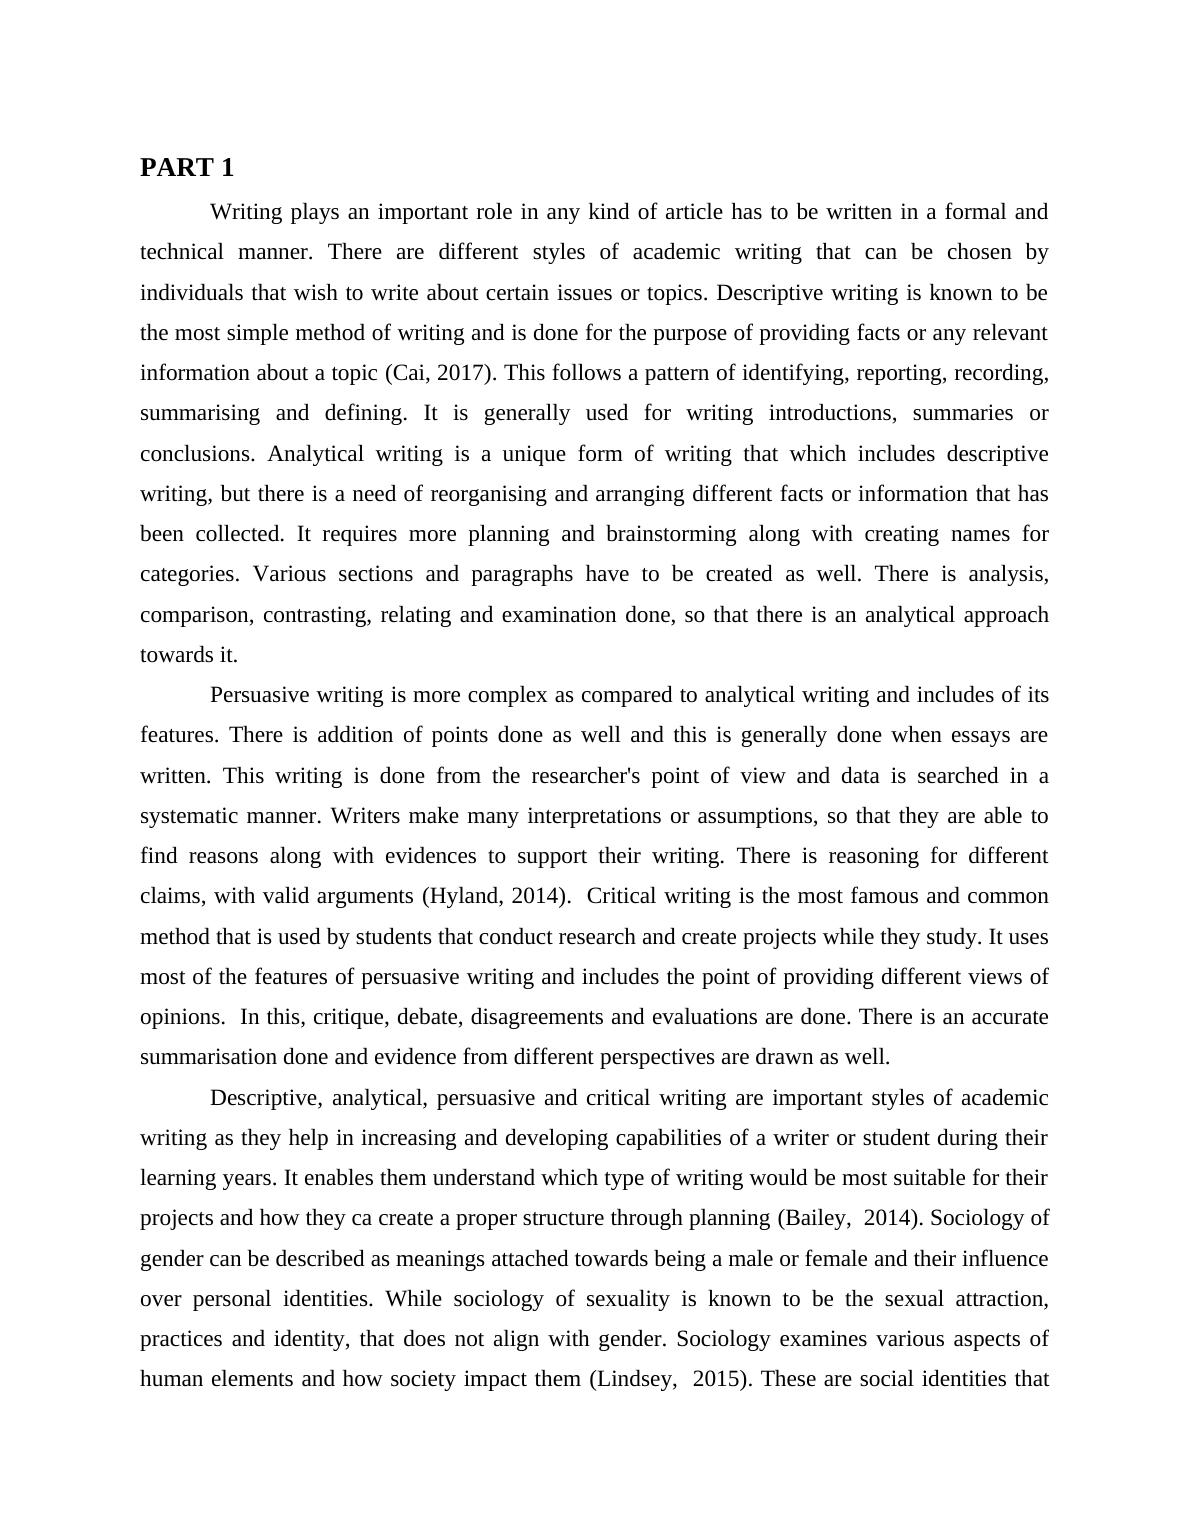 Sociology of gender and sexuality_3